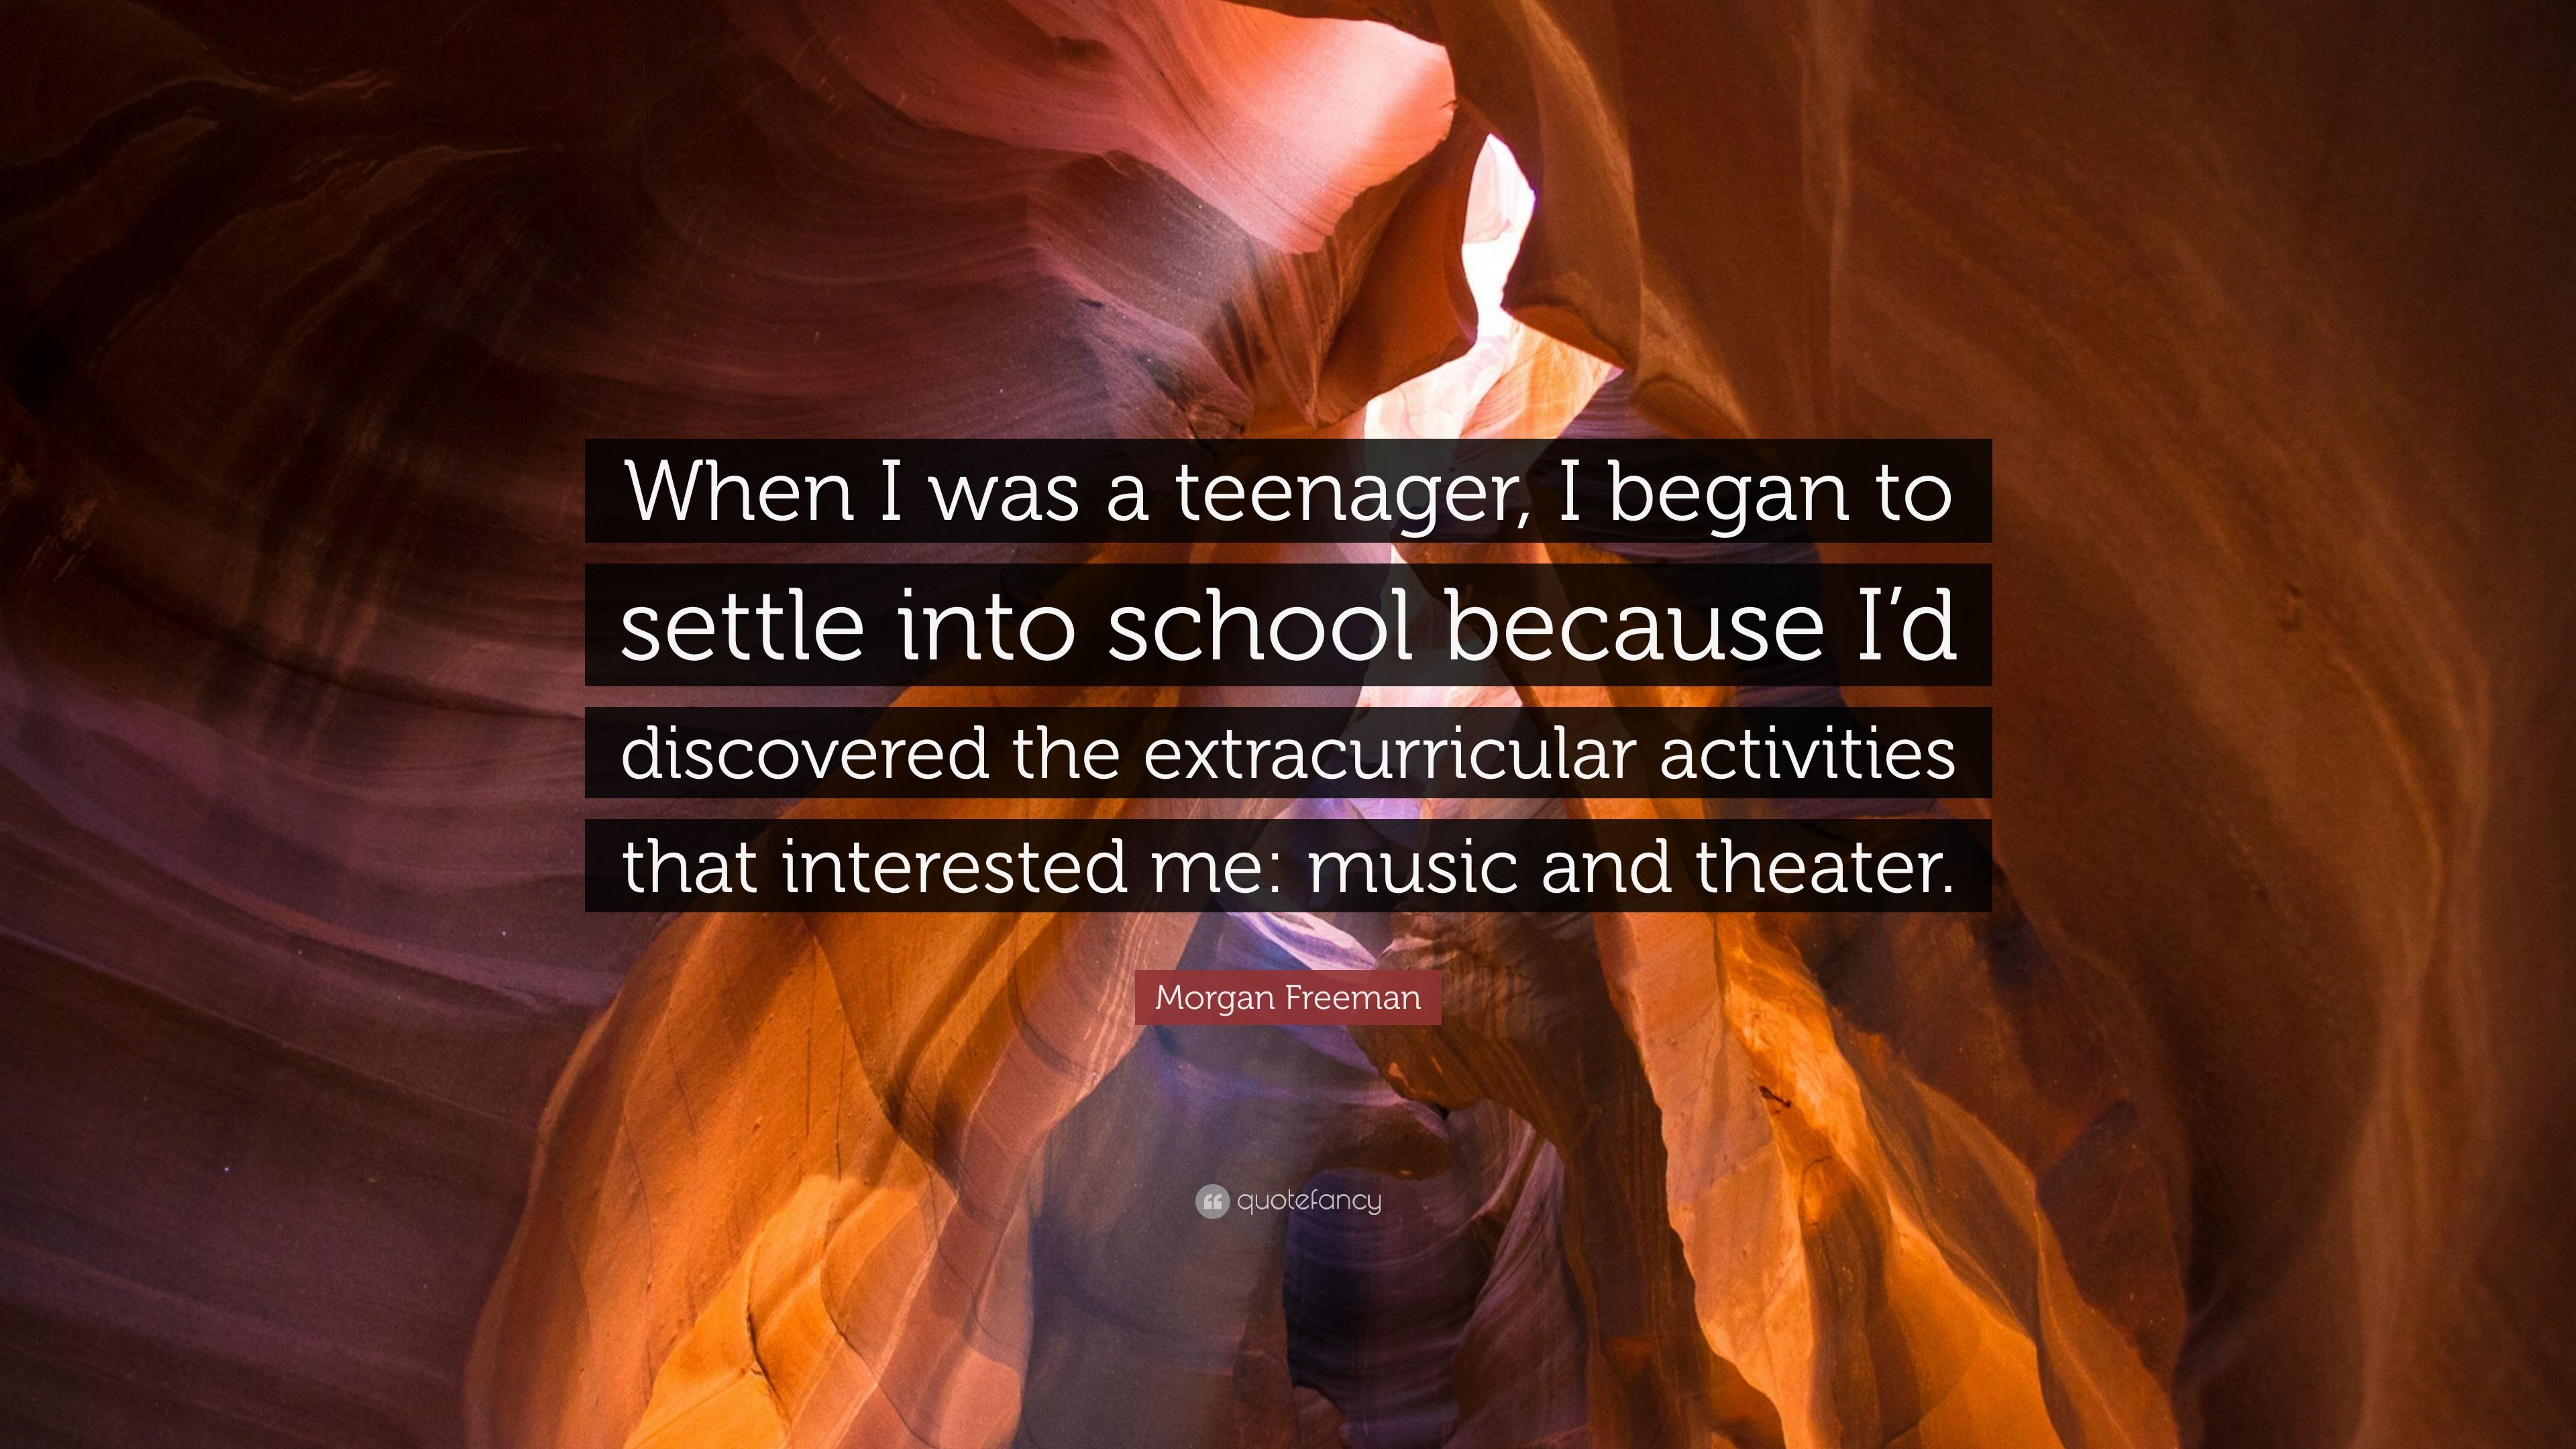 Morgan Freeman Quote: “When I was a teenager, I began to settle